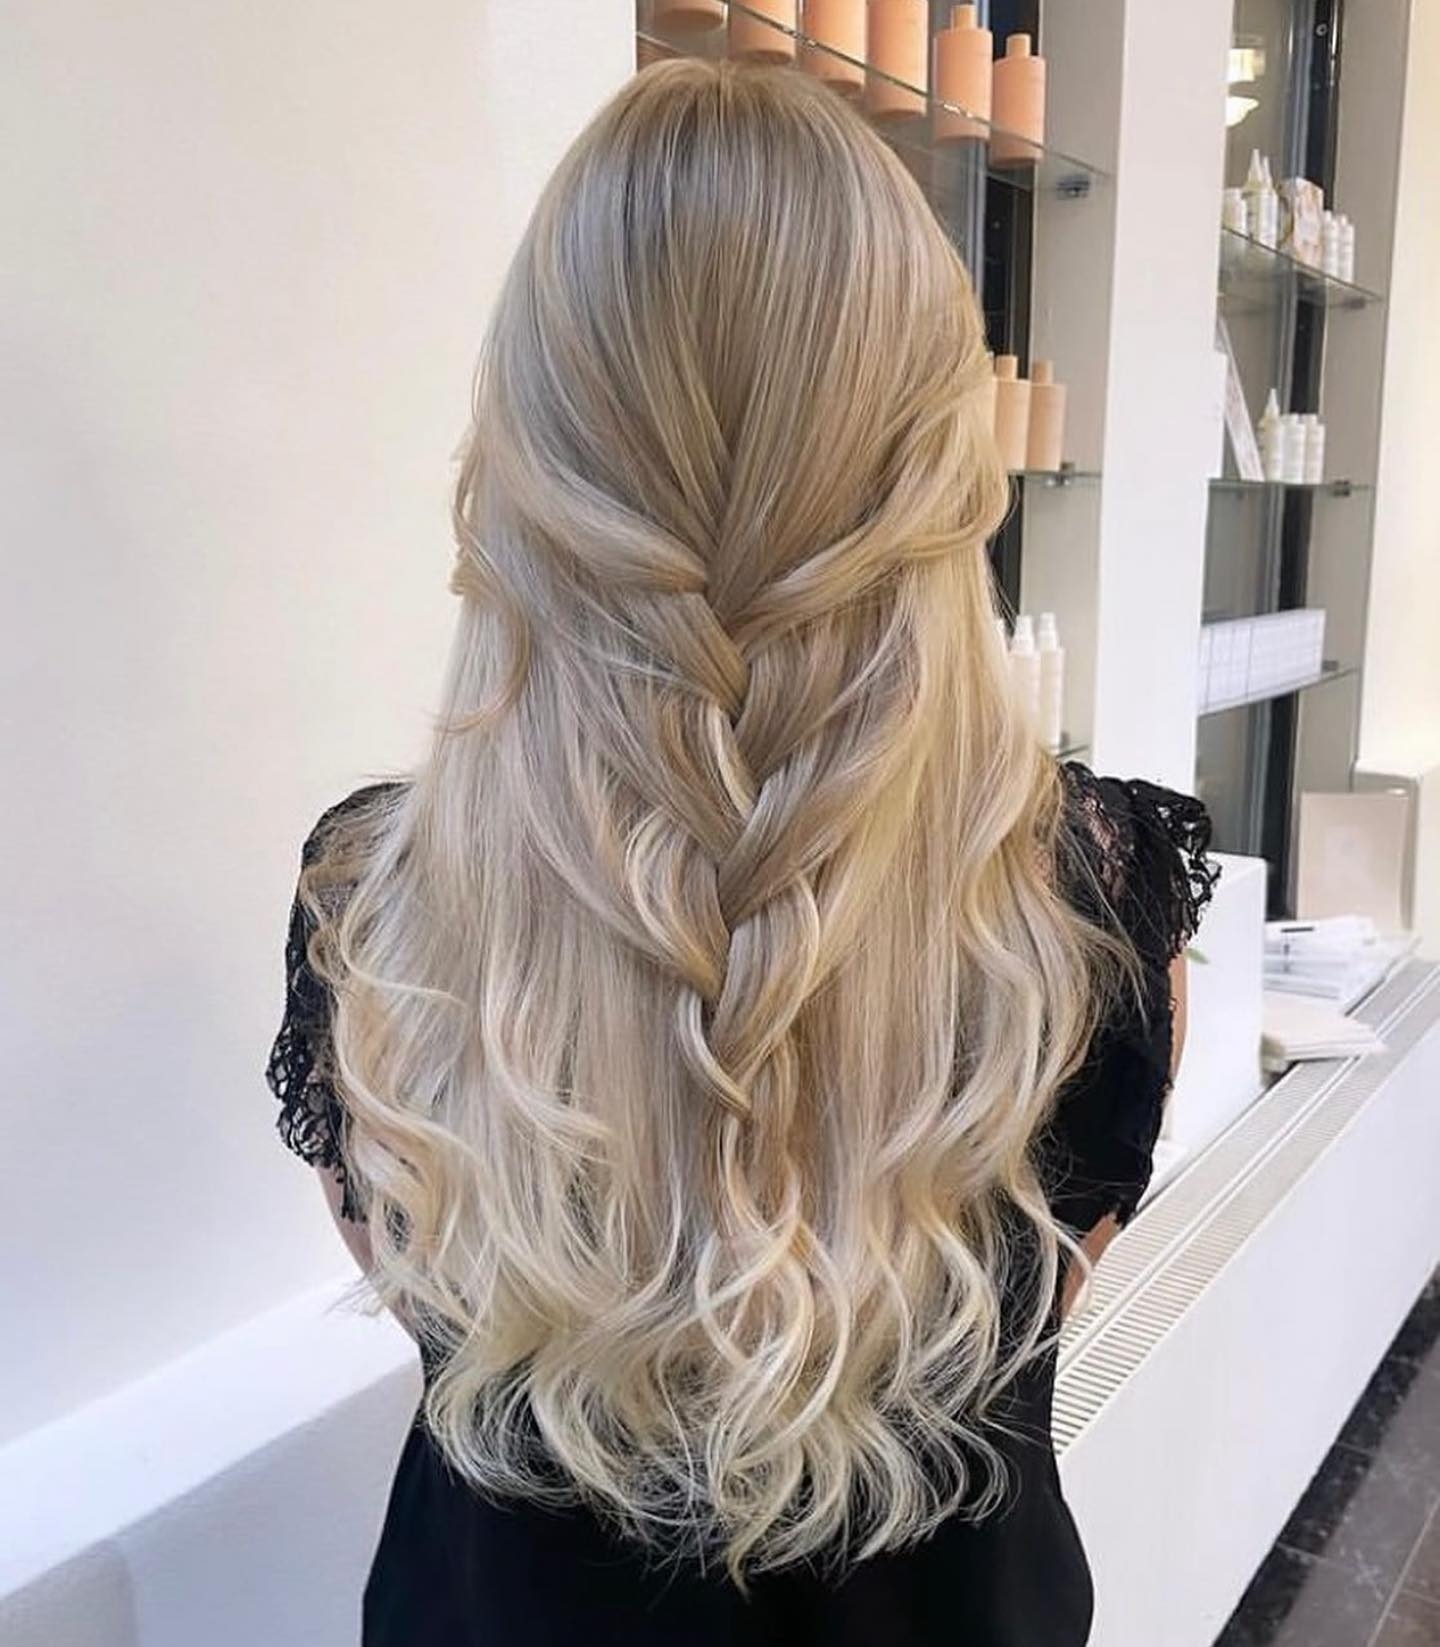 Photo from rapunzelofsweden with the caption No words needed✨

A perfect mix of Cendre Ash Blonde Mix & Cool Platinum Blond Balayage 🤍
@rapunzelgoteborg @nathalie_rapunzel 

#hairextensions #hairextensionspecialist #hairgoals #blondehair #hairfashion #hairideas #hairart #hairtransformation #hairenvy #hairinspiration